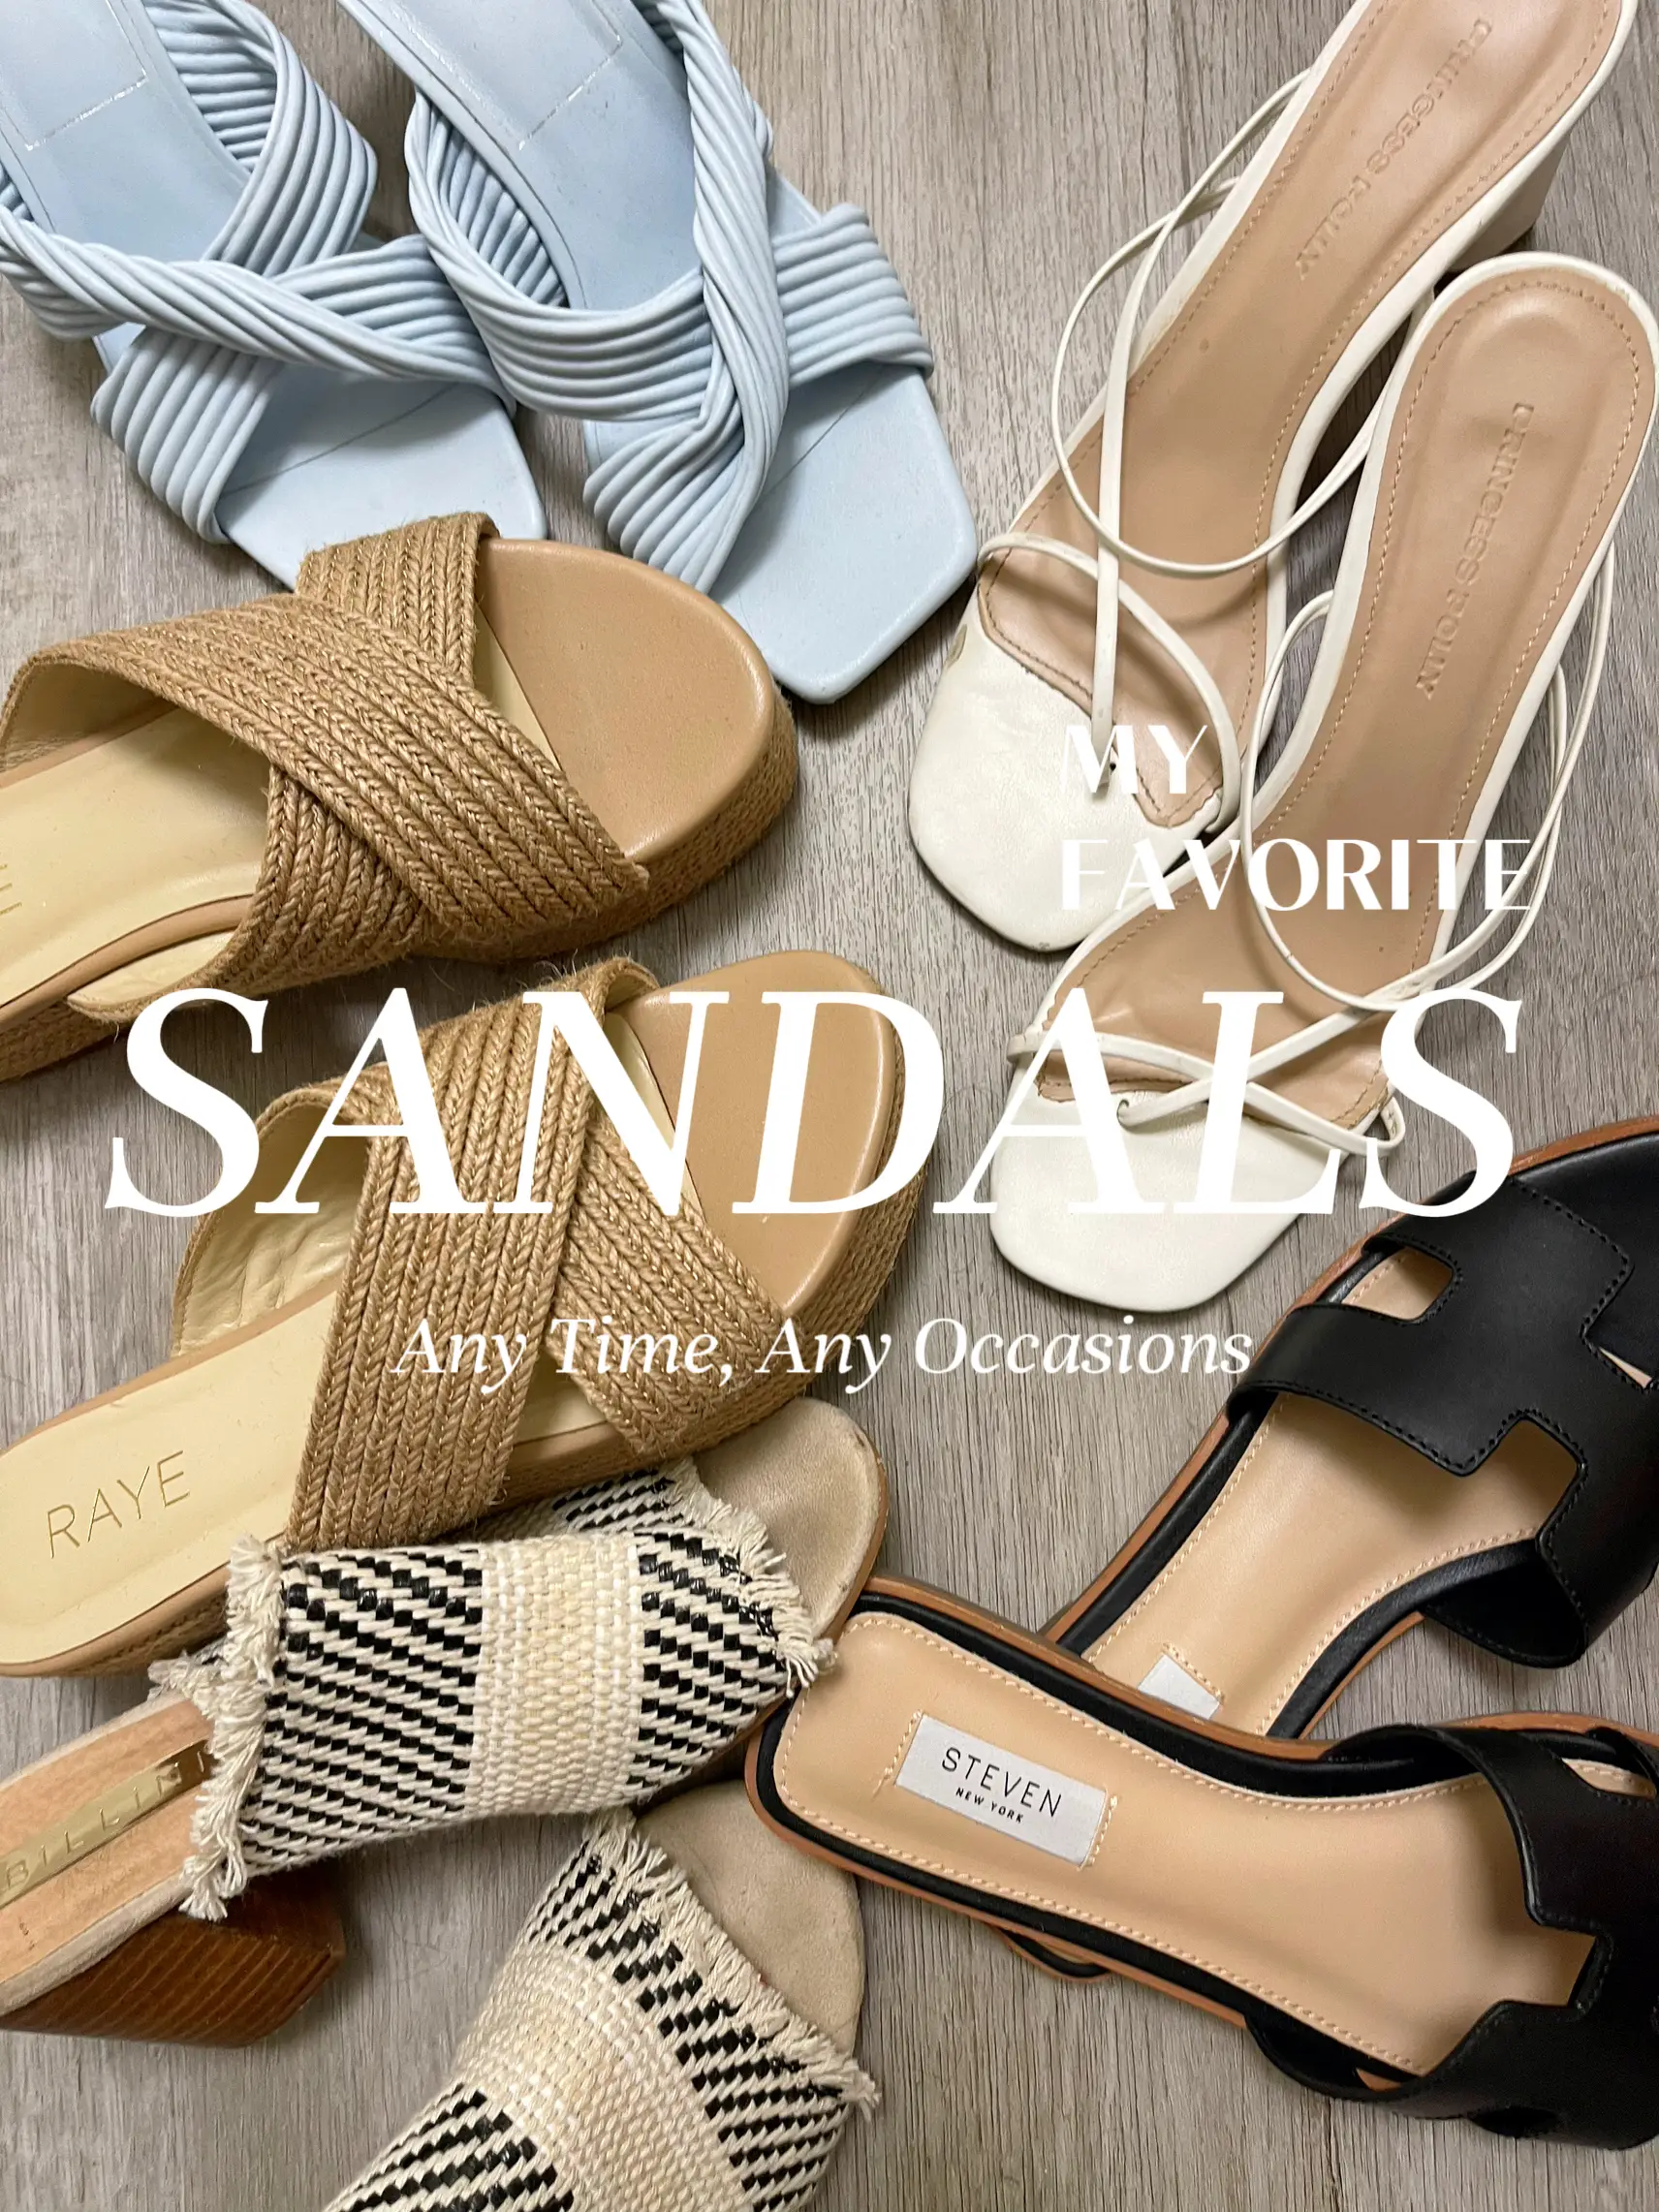 Women's High-Heel Sandals, Comfortable Flip-Flops, Wide-Fit, White-Colored  High-Heels, Monochromatic Slippers, Suitable For Various Occasions  Including Dress Shoes, Party Shoes, Formal Shoes, Dressy Sandals, Work  Shoes, Daily Slippers, And Flat Sandals